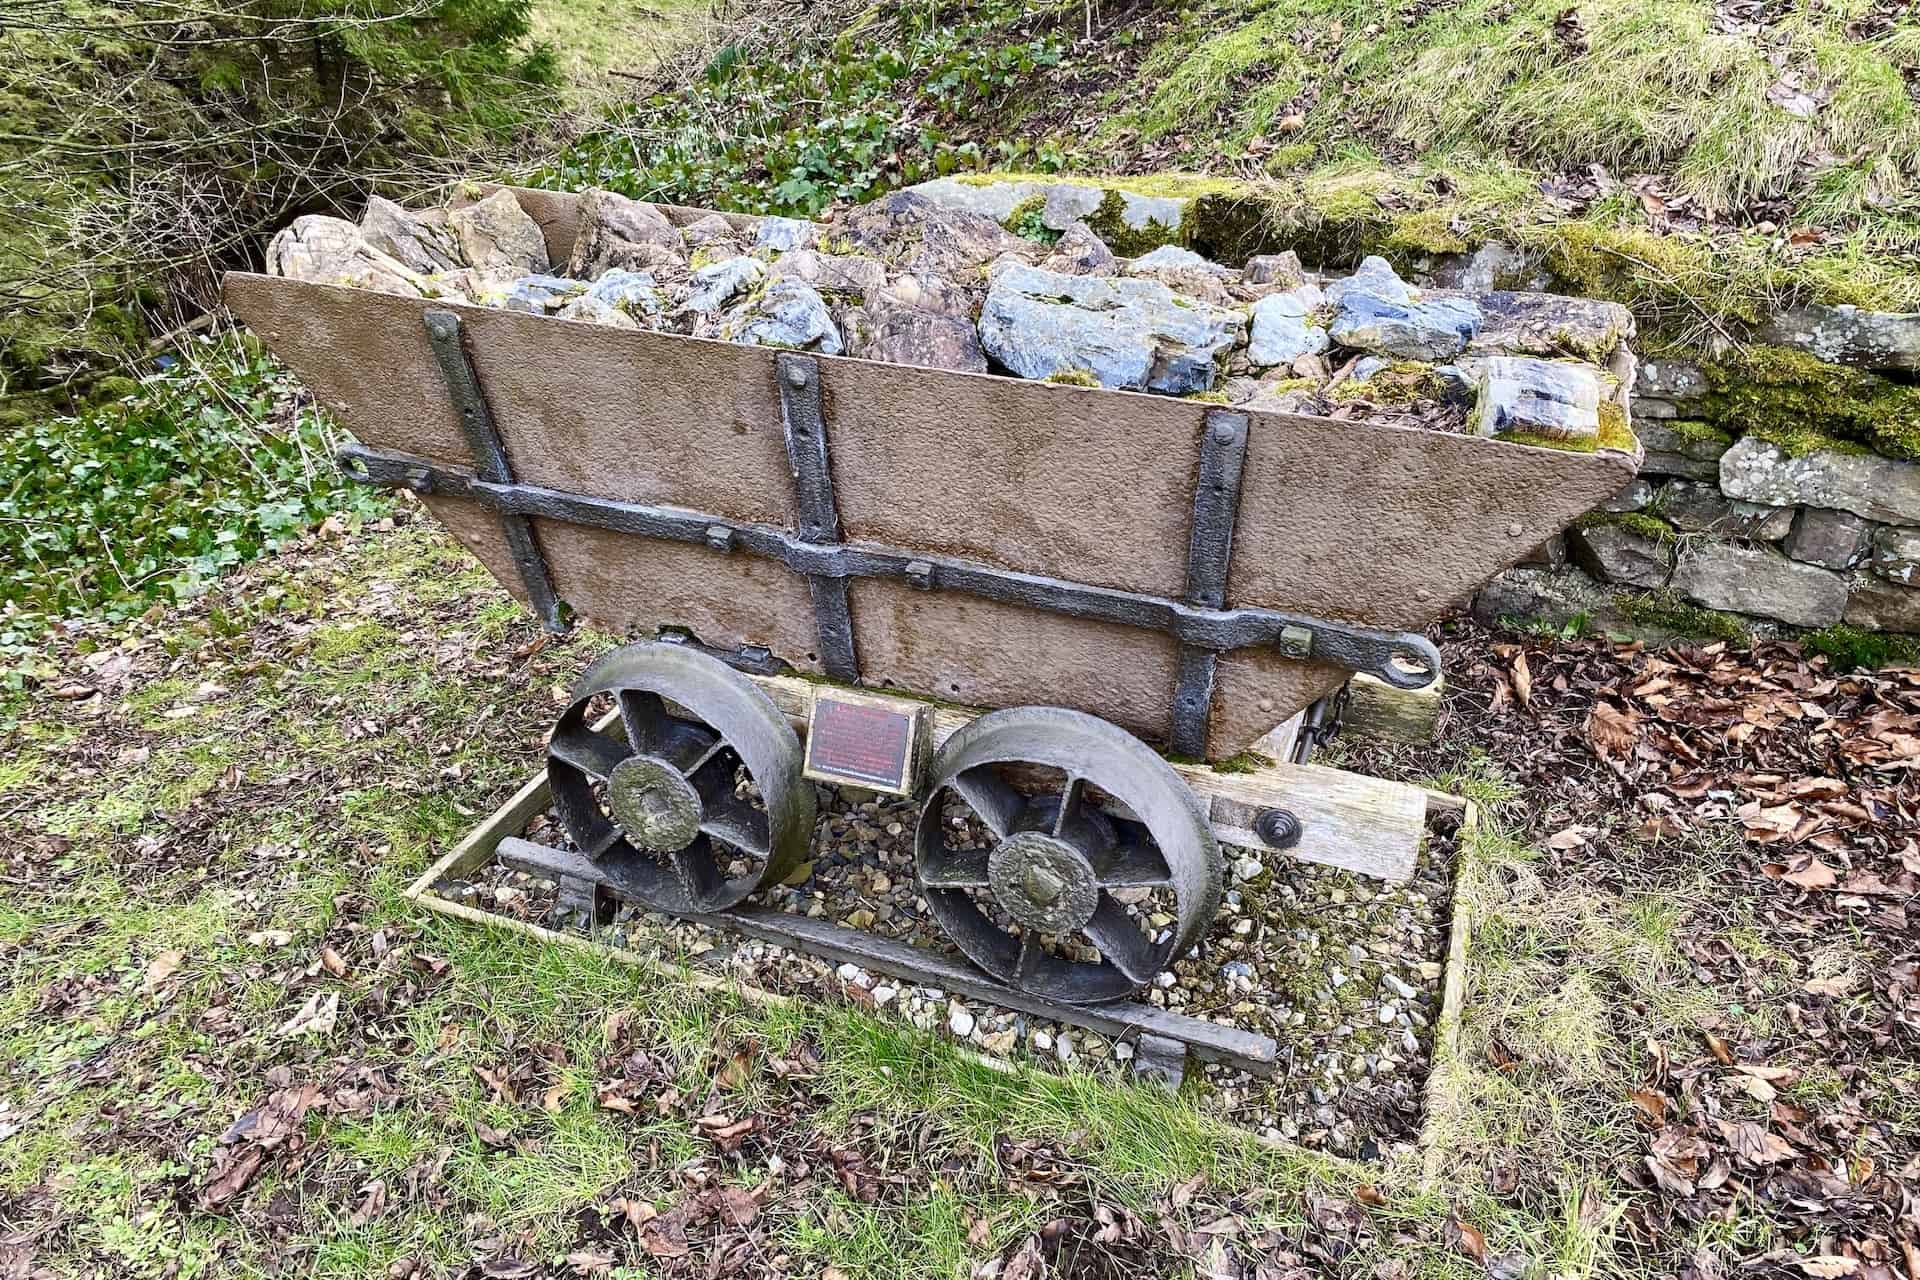 In the 19th century, wagons like these were used to move lead ore and waste from the underground mines in the Yorkshire Dales. These wagons were drawn by horses and ran on rails made of iron, which are still visible in some of the old mines today.